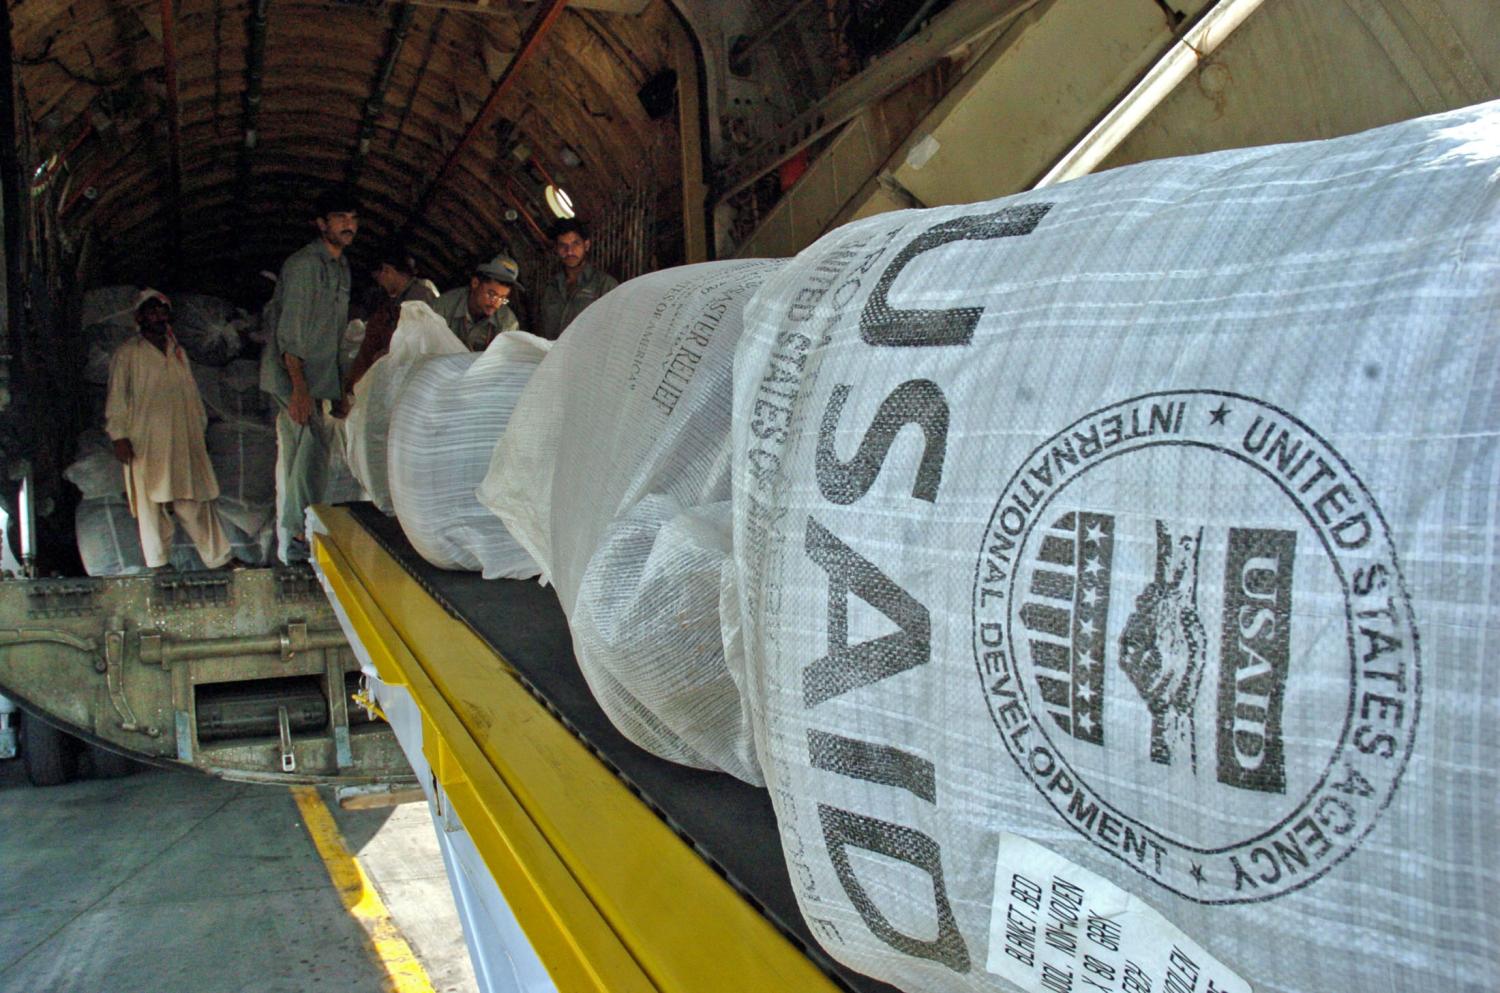 Pakistani workers unloads relief goods sent by the U.S. Agency for International Development (USAID) at a military base in Rawalpindi October 10, 2005. Donor nations rushed doctors, helicopters, food, tents and sniffer dogs to help the victims of Pakistan's devastating earthquake on Monday as the death toll topped 20,000. Aid agencies said more than 120,000 people, many of them children, were in urgent need of shelter and up to four million could be left homeless by the 7.6 magnitude earthquake which wrecked buildings and villages in Pakistan's northern mountains. REUTERS/Mian Khursheed - RP2DSFHVAJAE